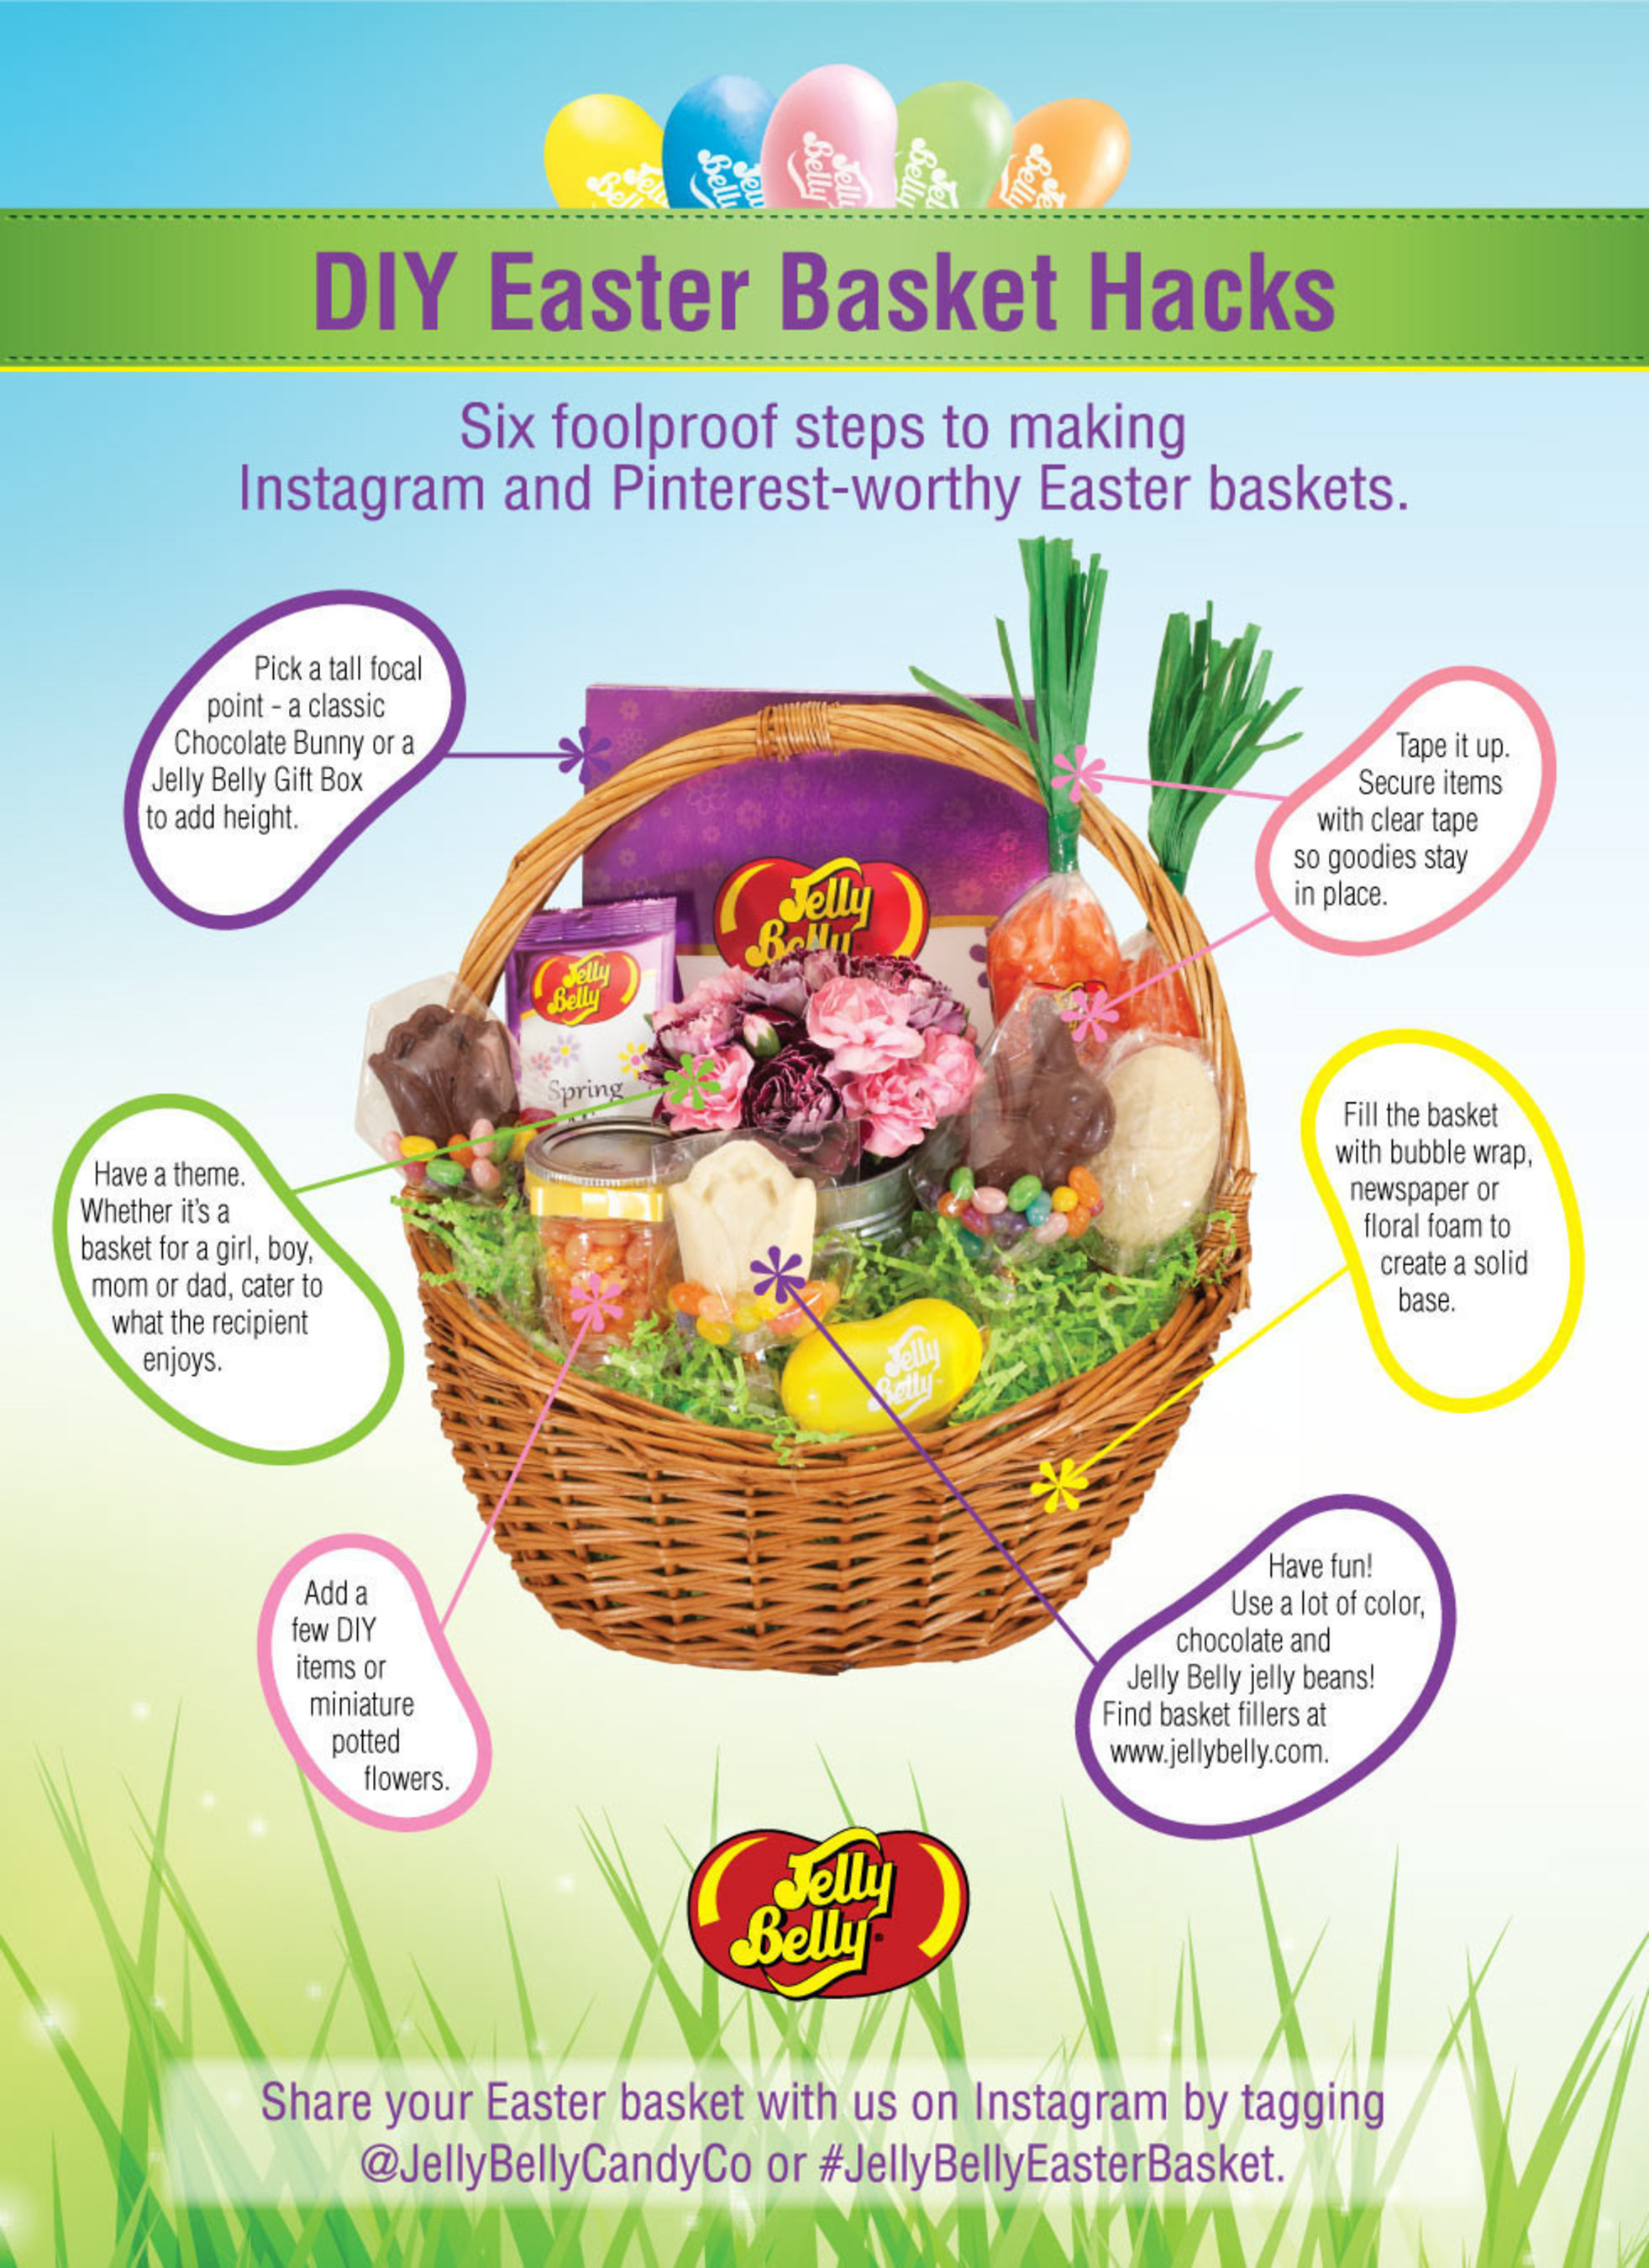 Jelly Belly Offers Tips to Make Spring